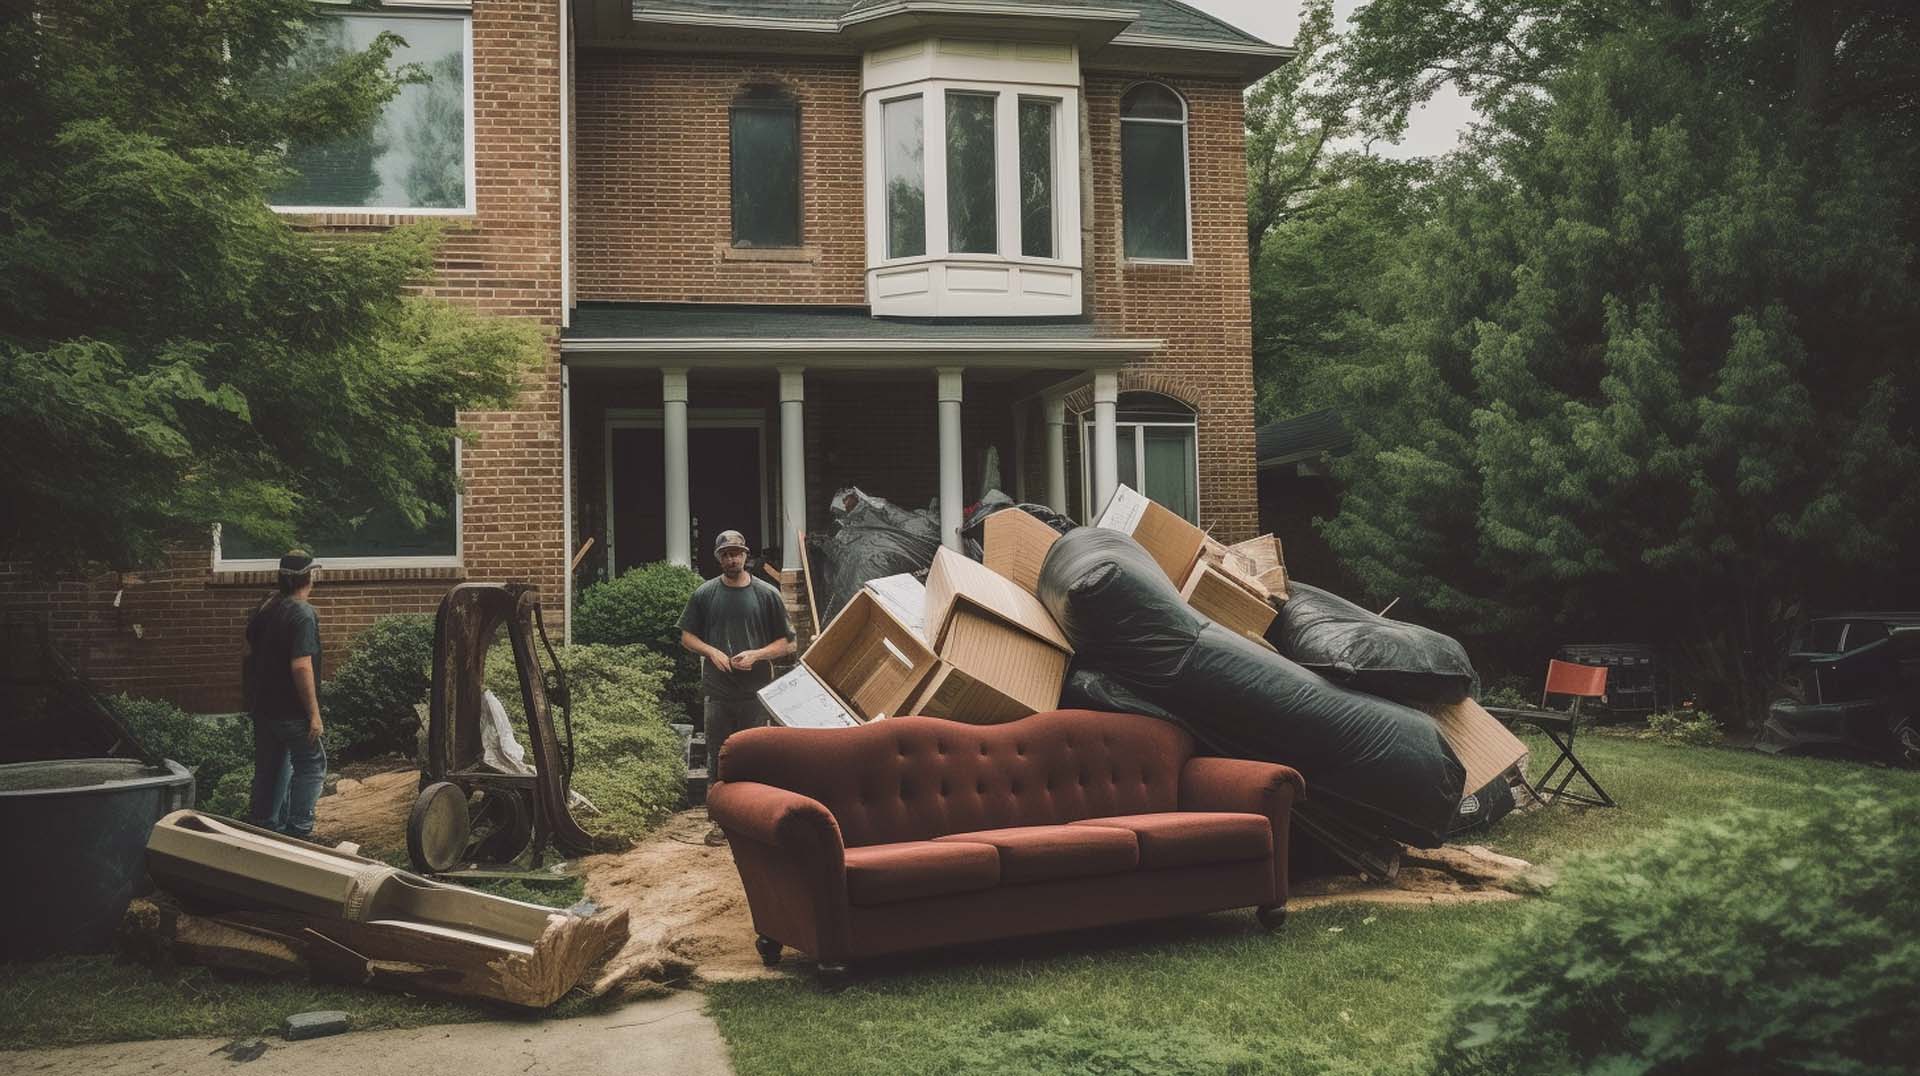 Residential Junk Removal Services in Halifax